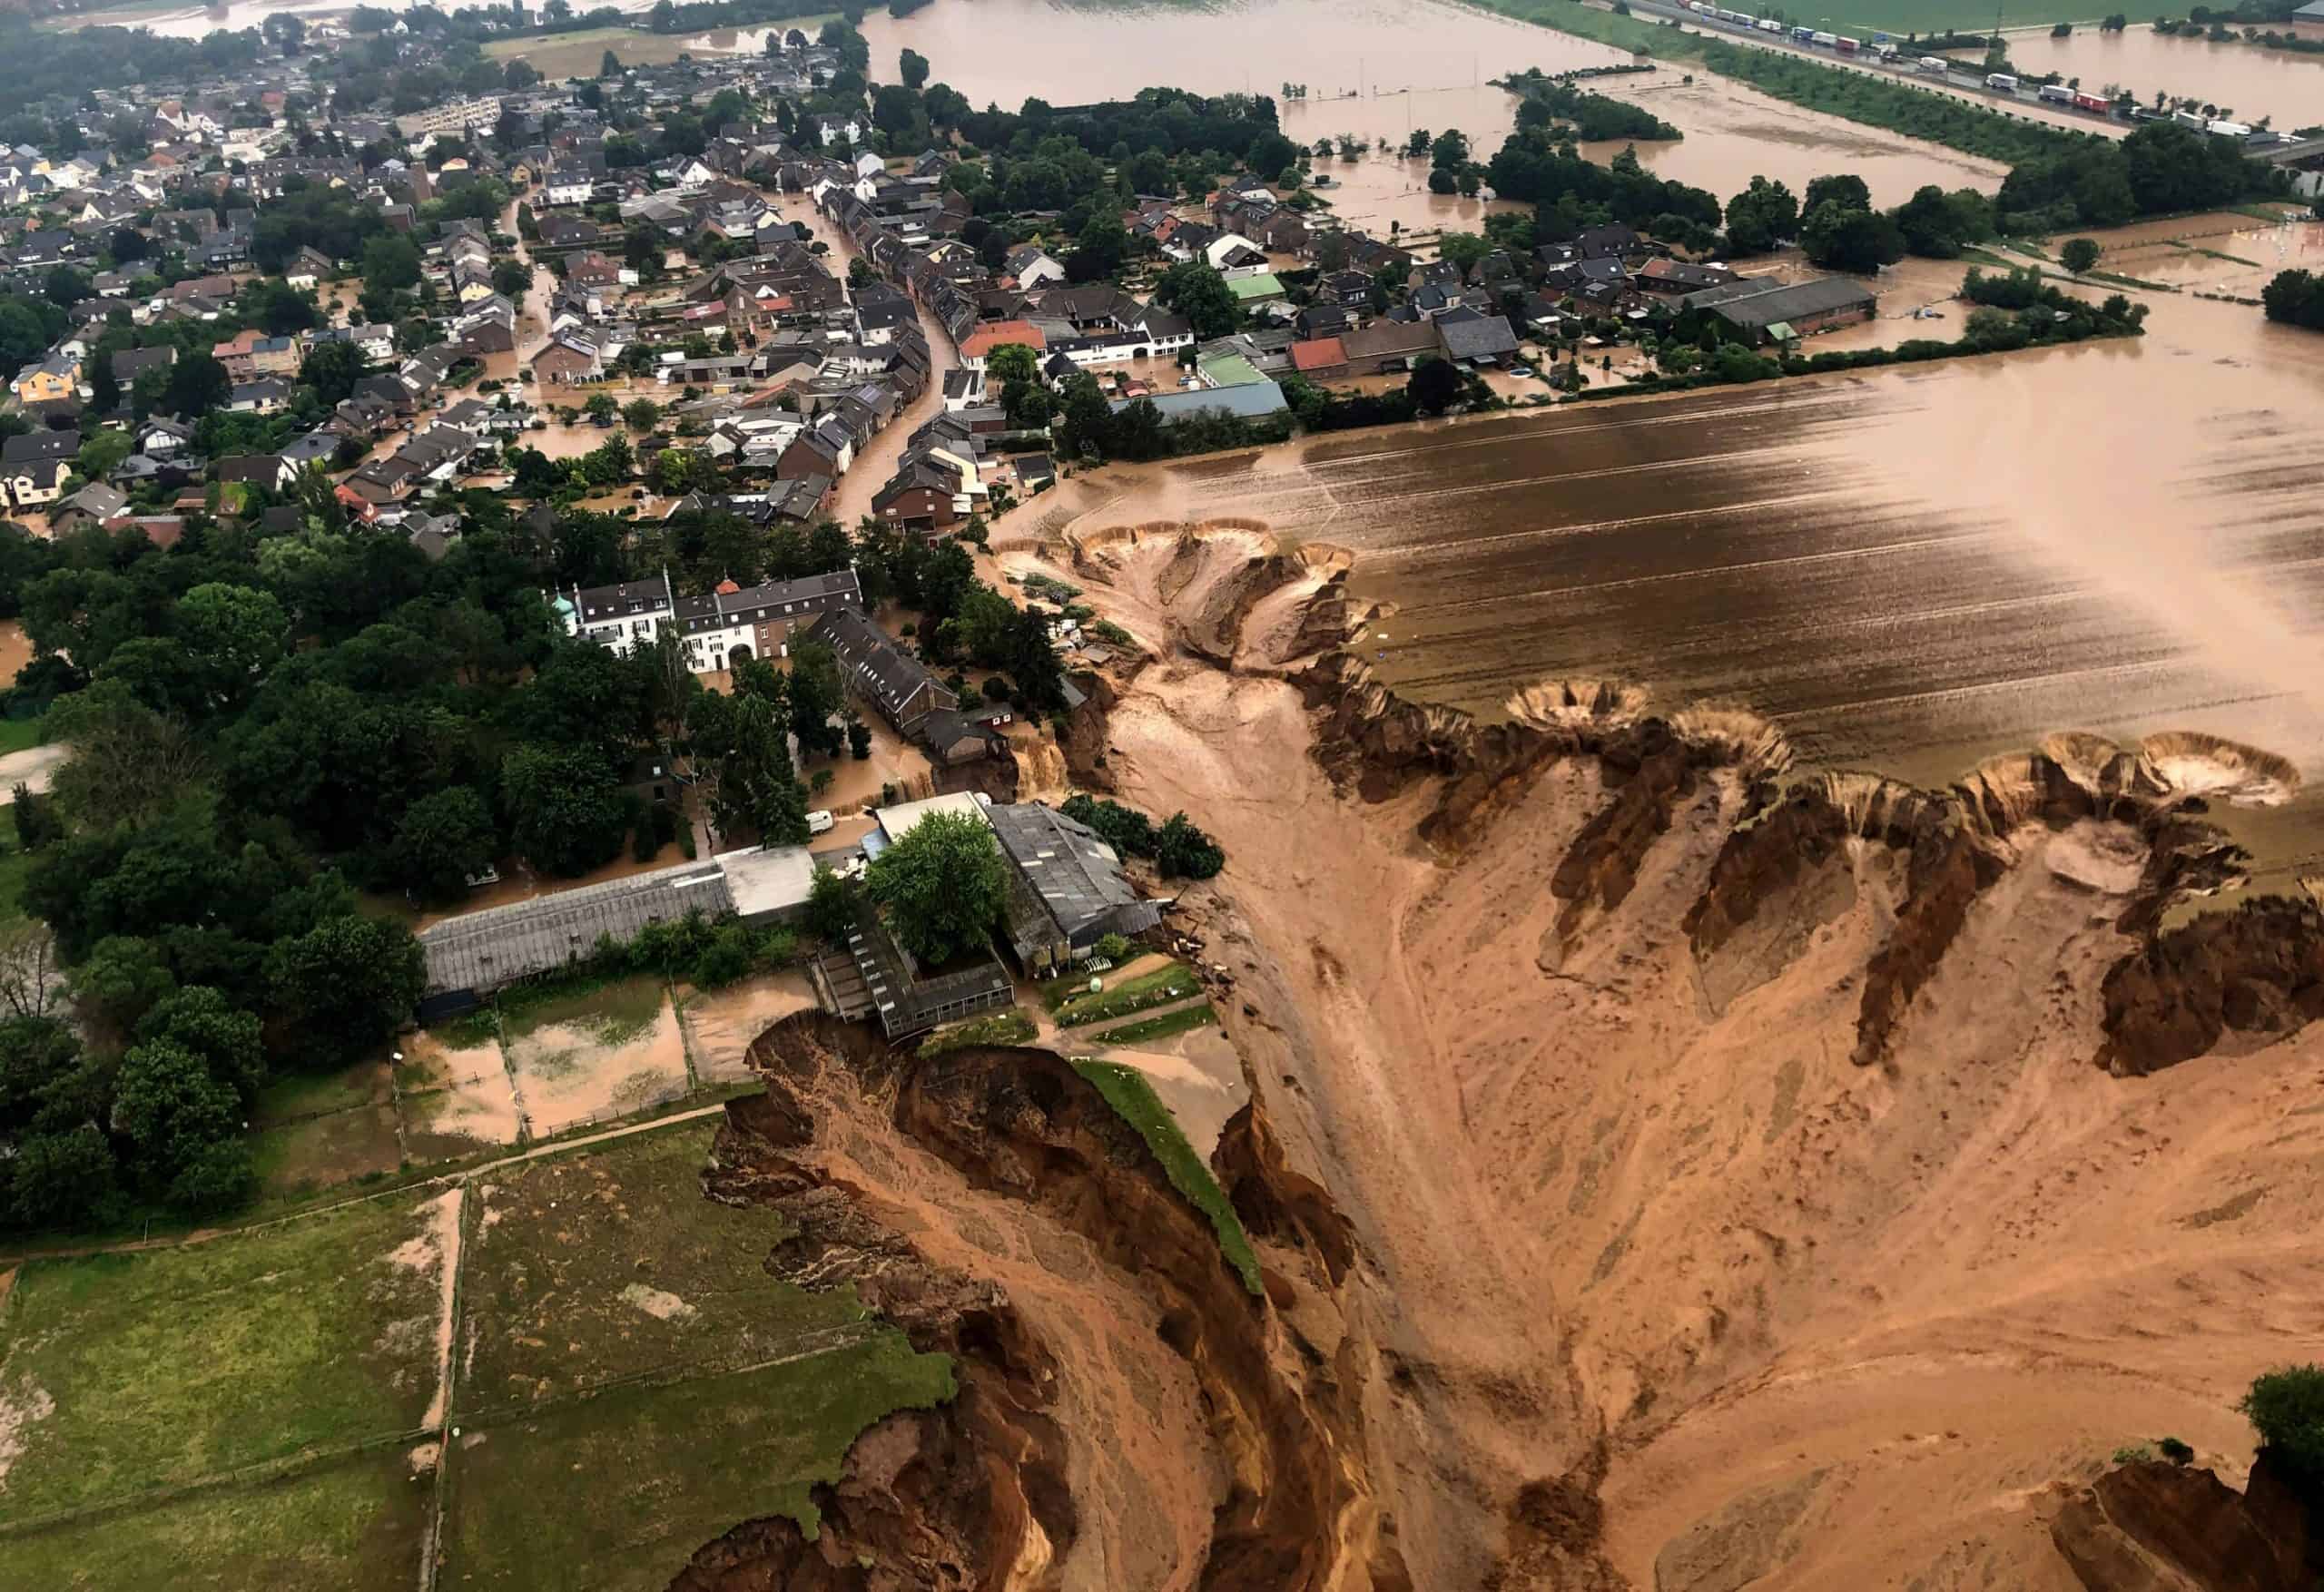 At least 120 people dead following devastating floods in Germany and Belgium